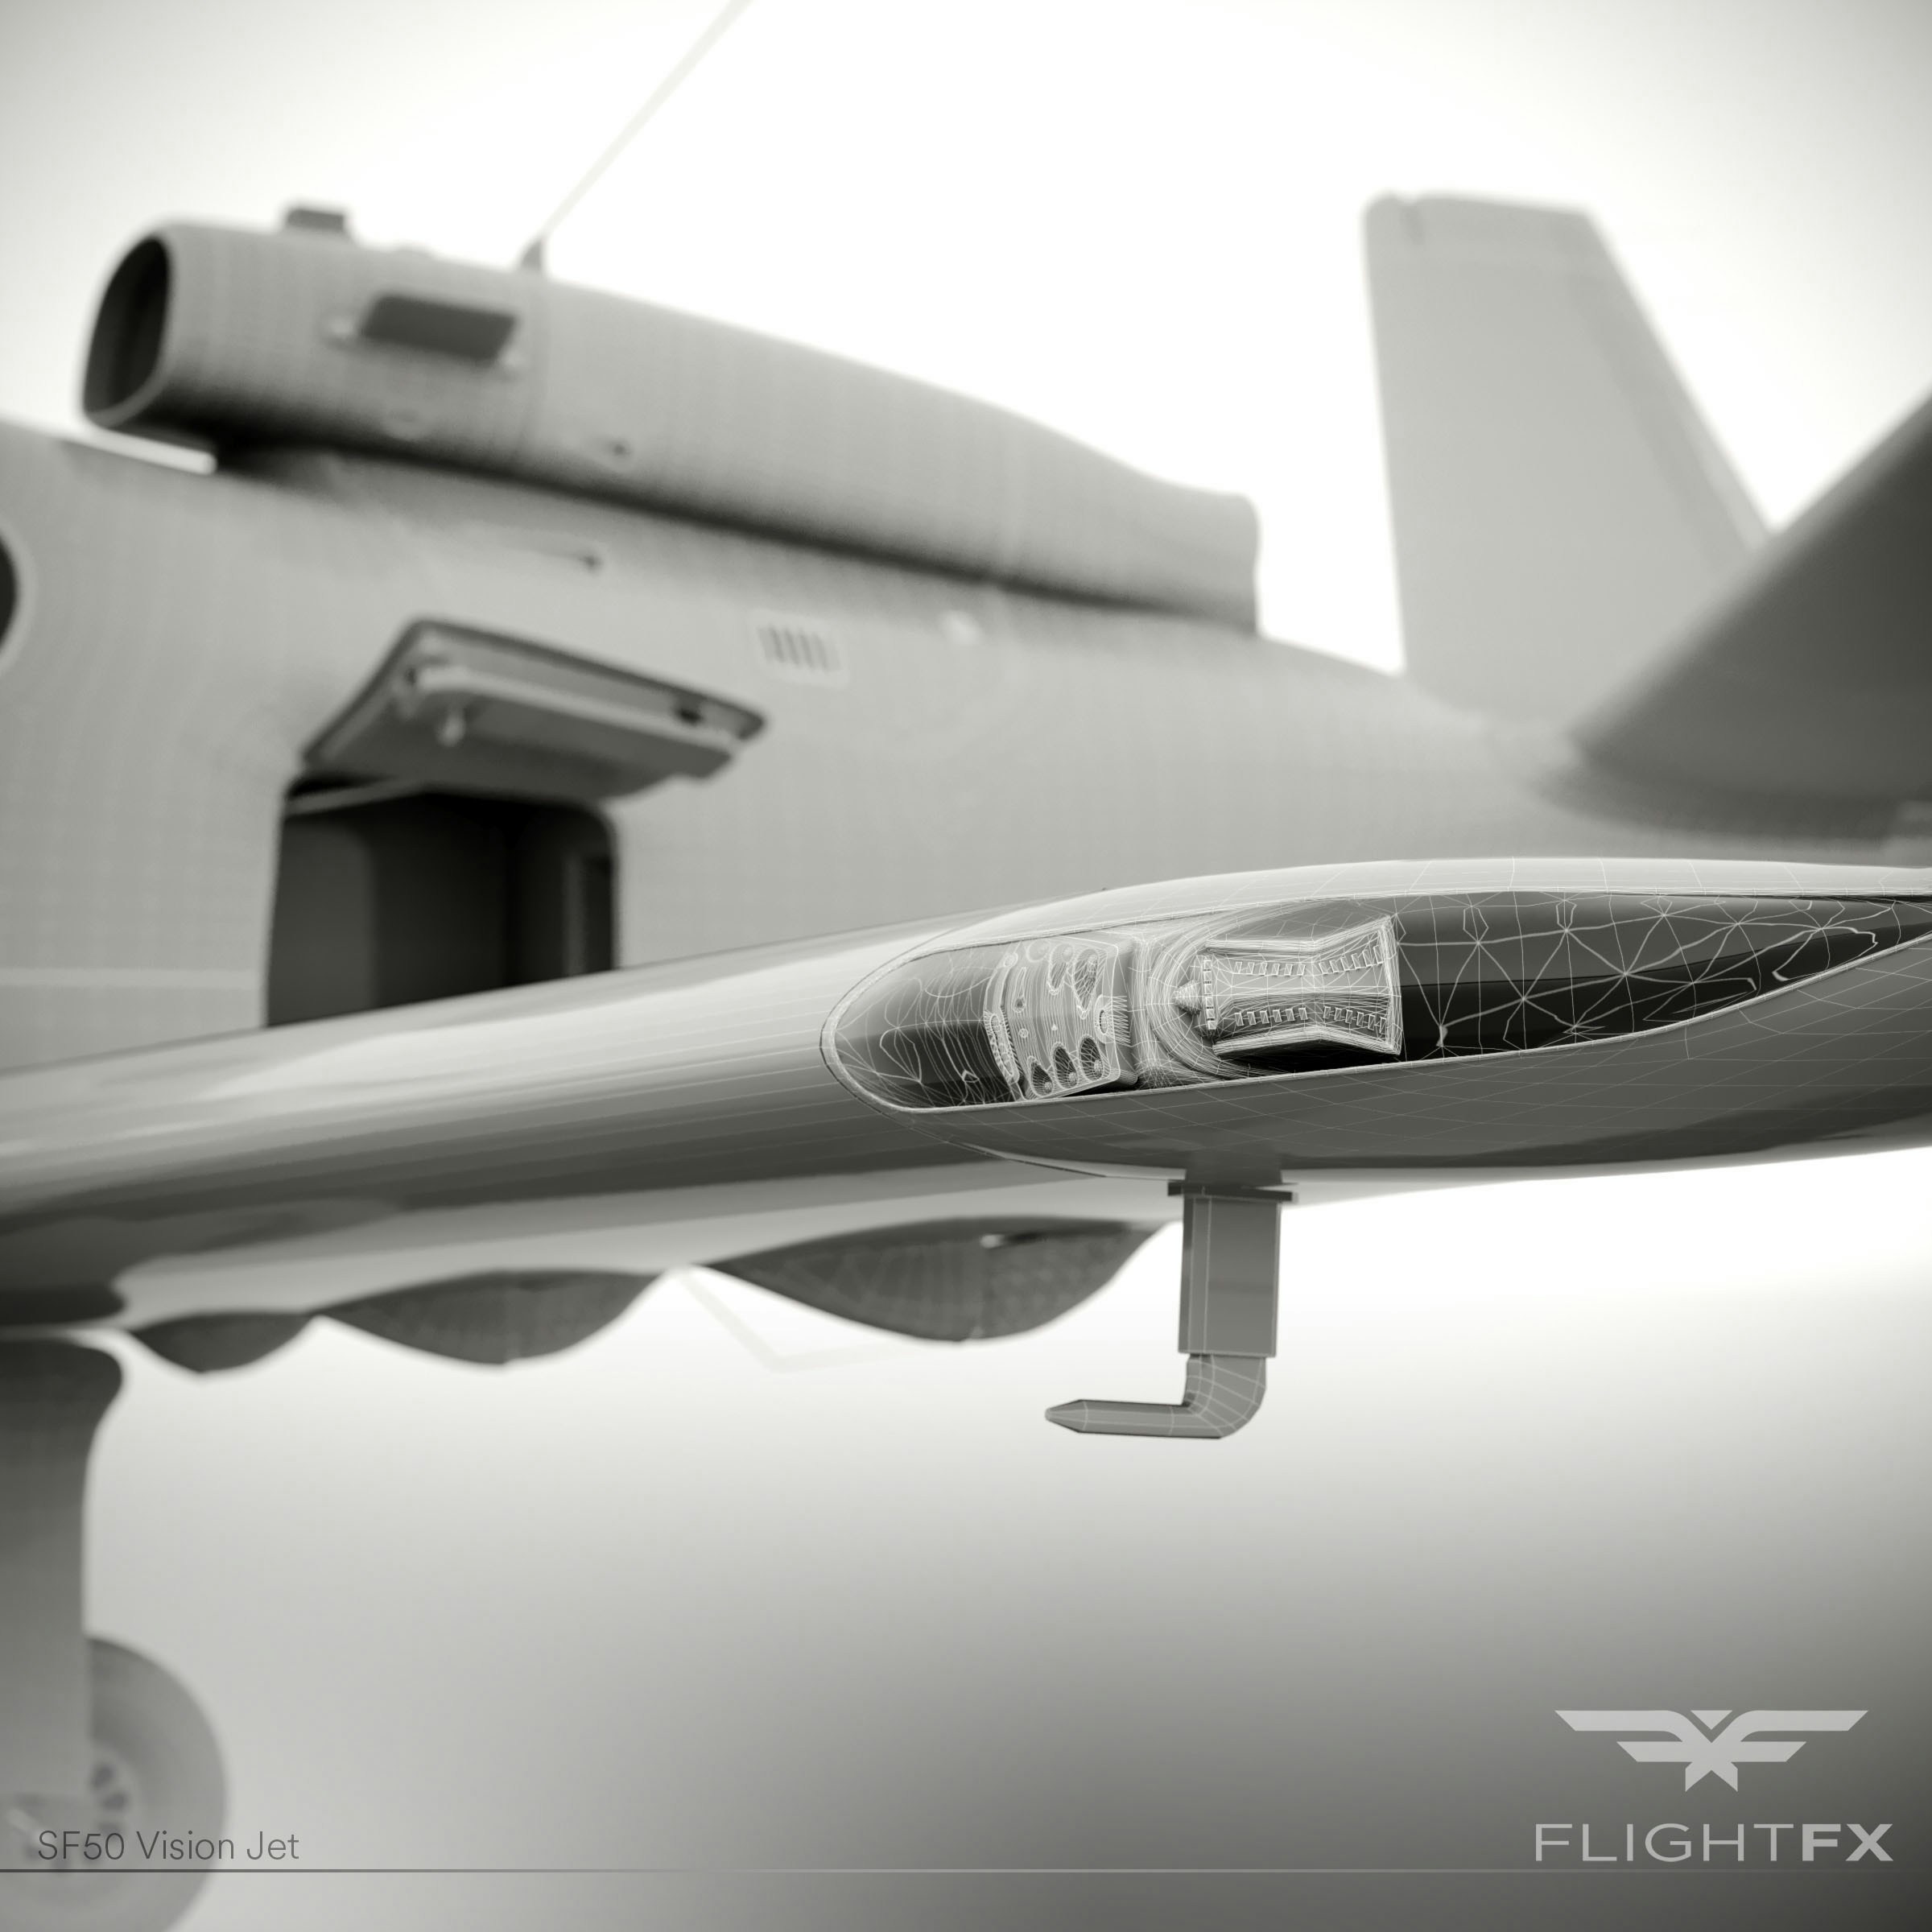 New Previews for the FlightFX Cirrus SF50 Vision Jet